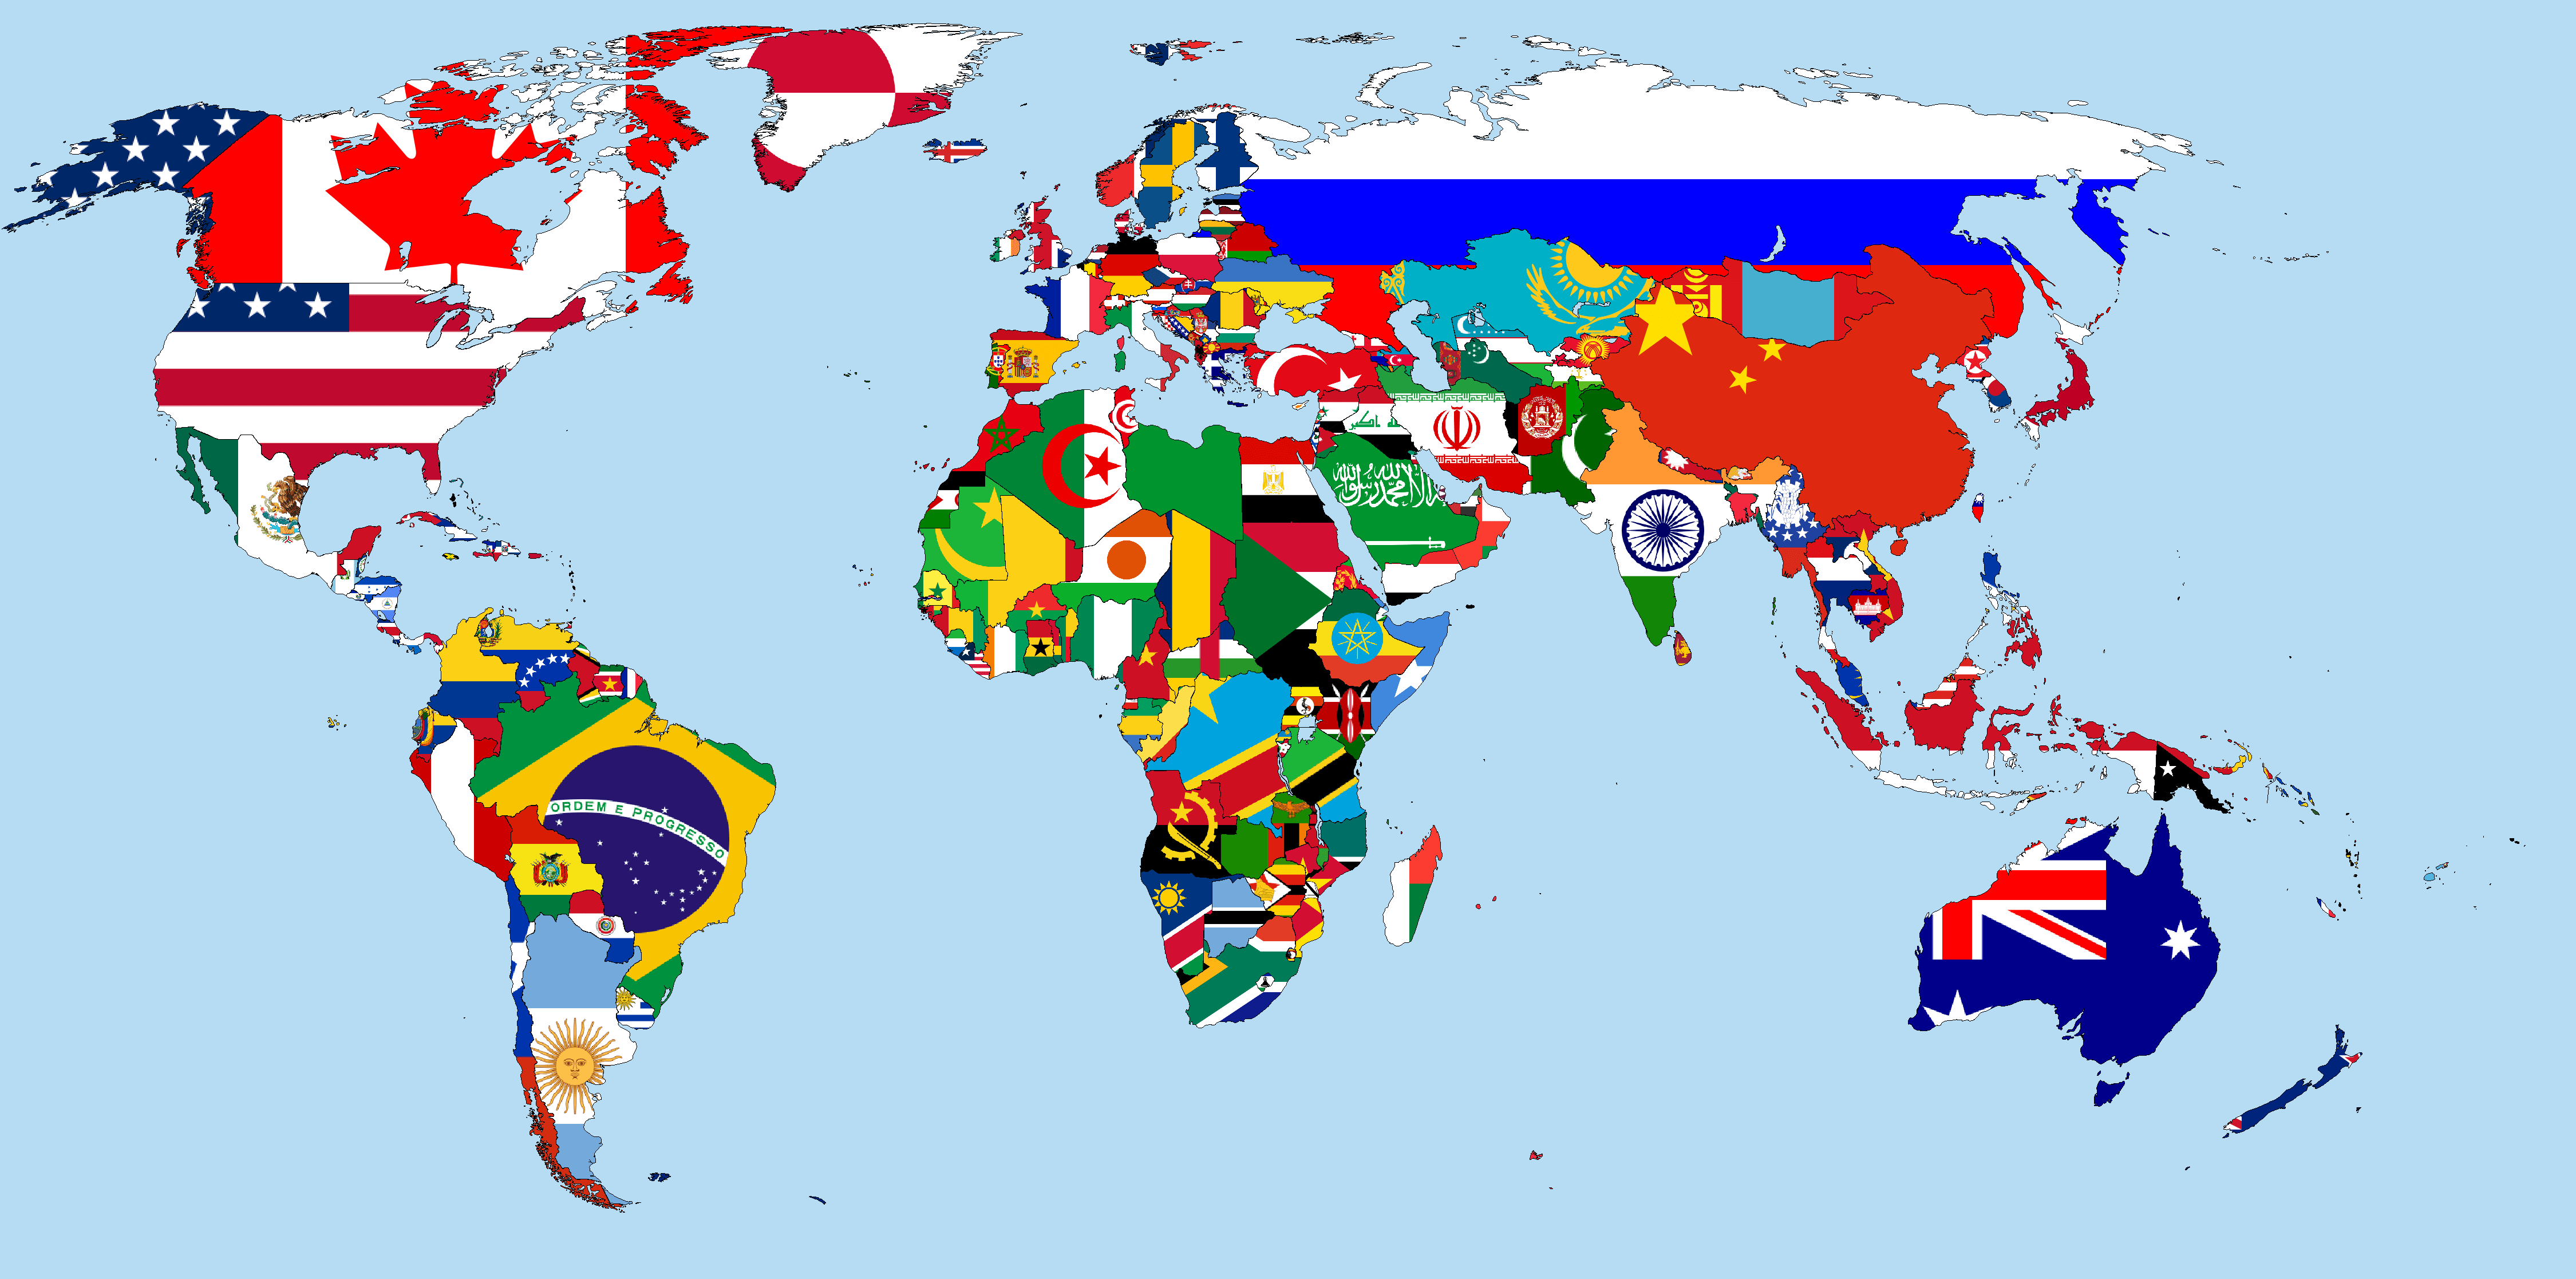 A cool world map with flags